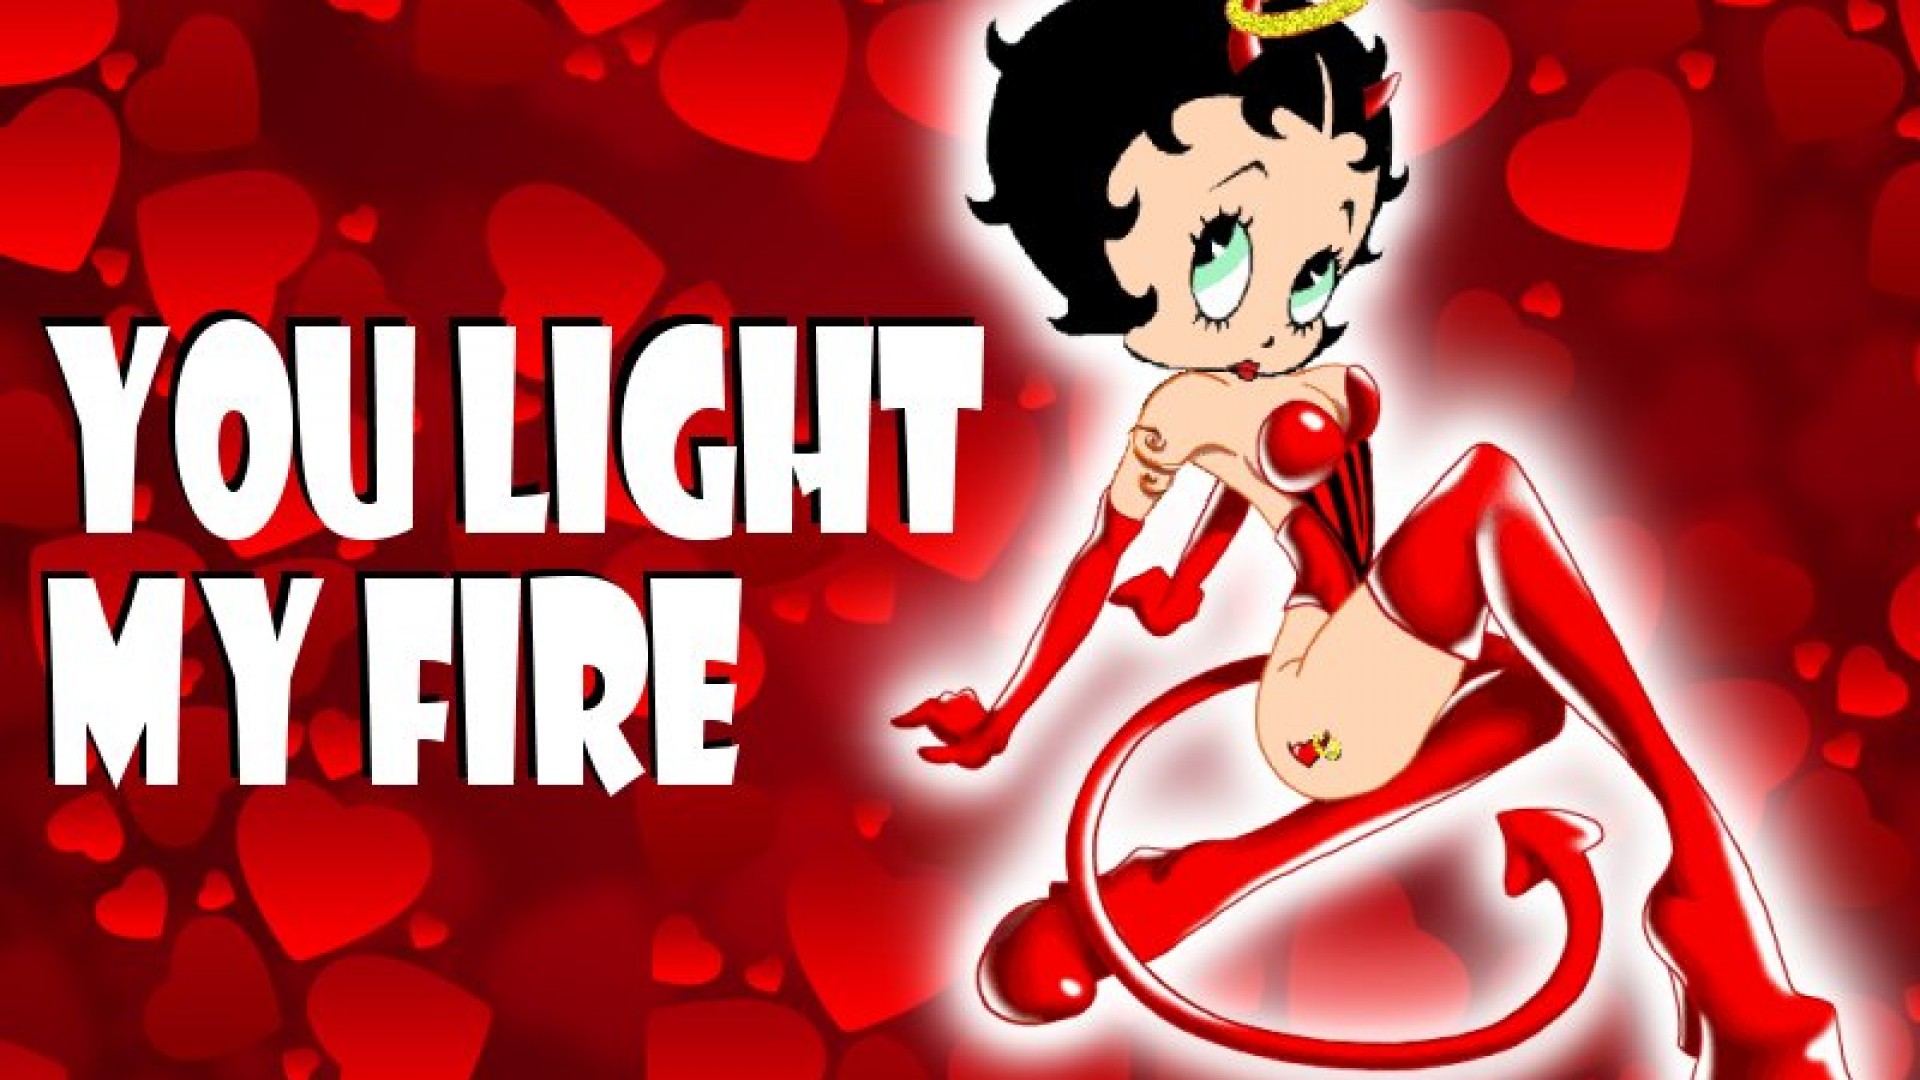 Betty Boop Wallpaper HD Pictures To Pin